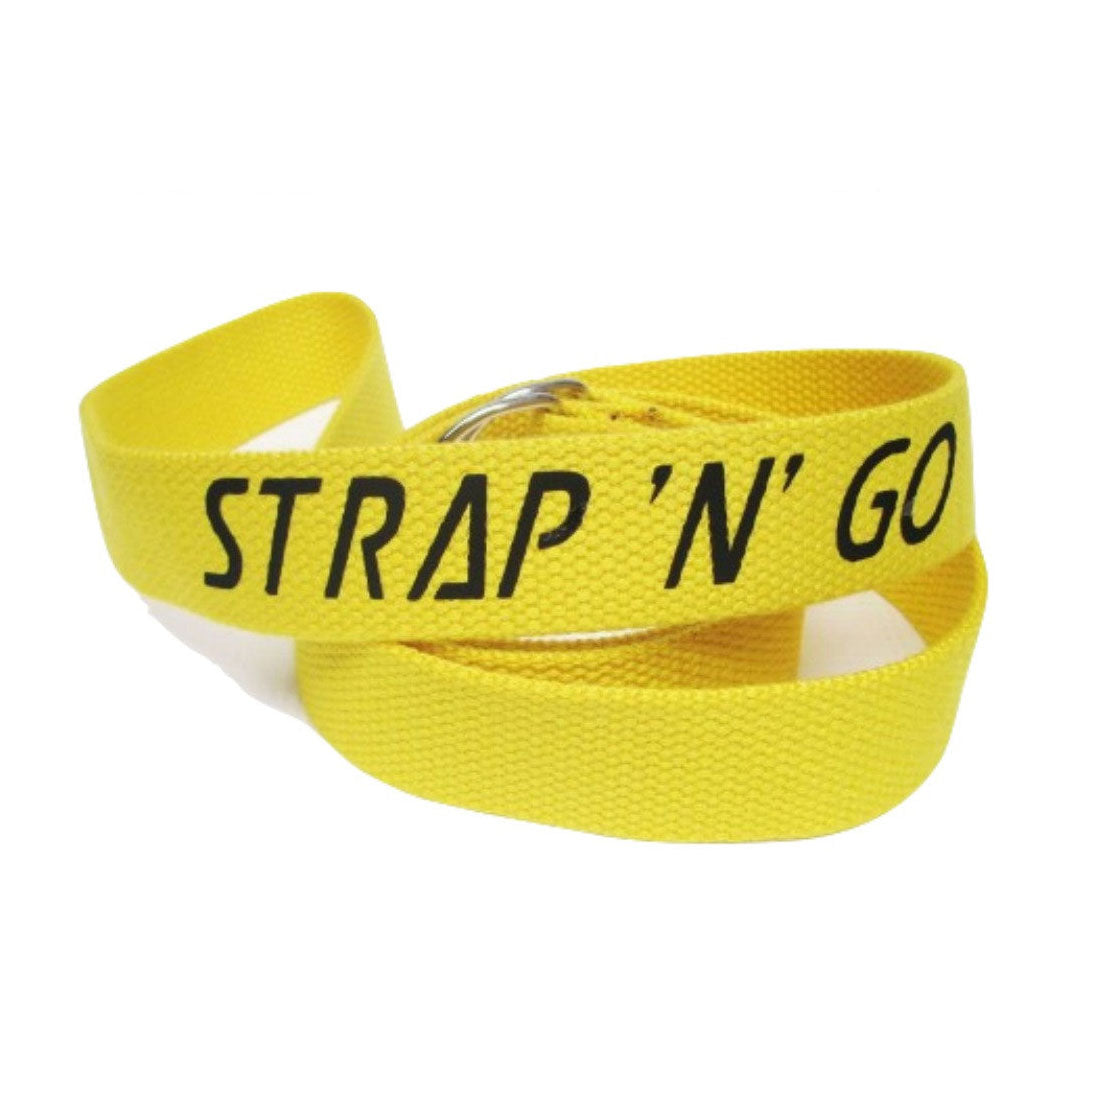 Strap N Go Skate Noose/Leash - Solid Colours Yellow Roller Skate Accessories